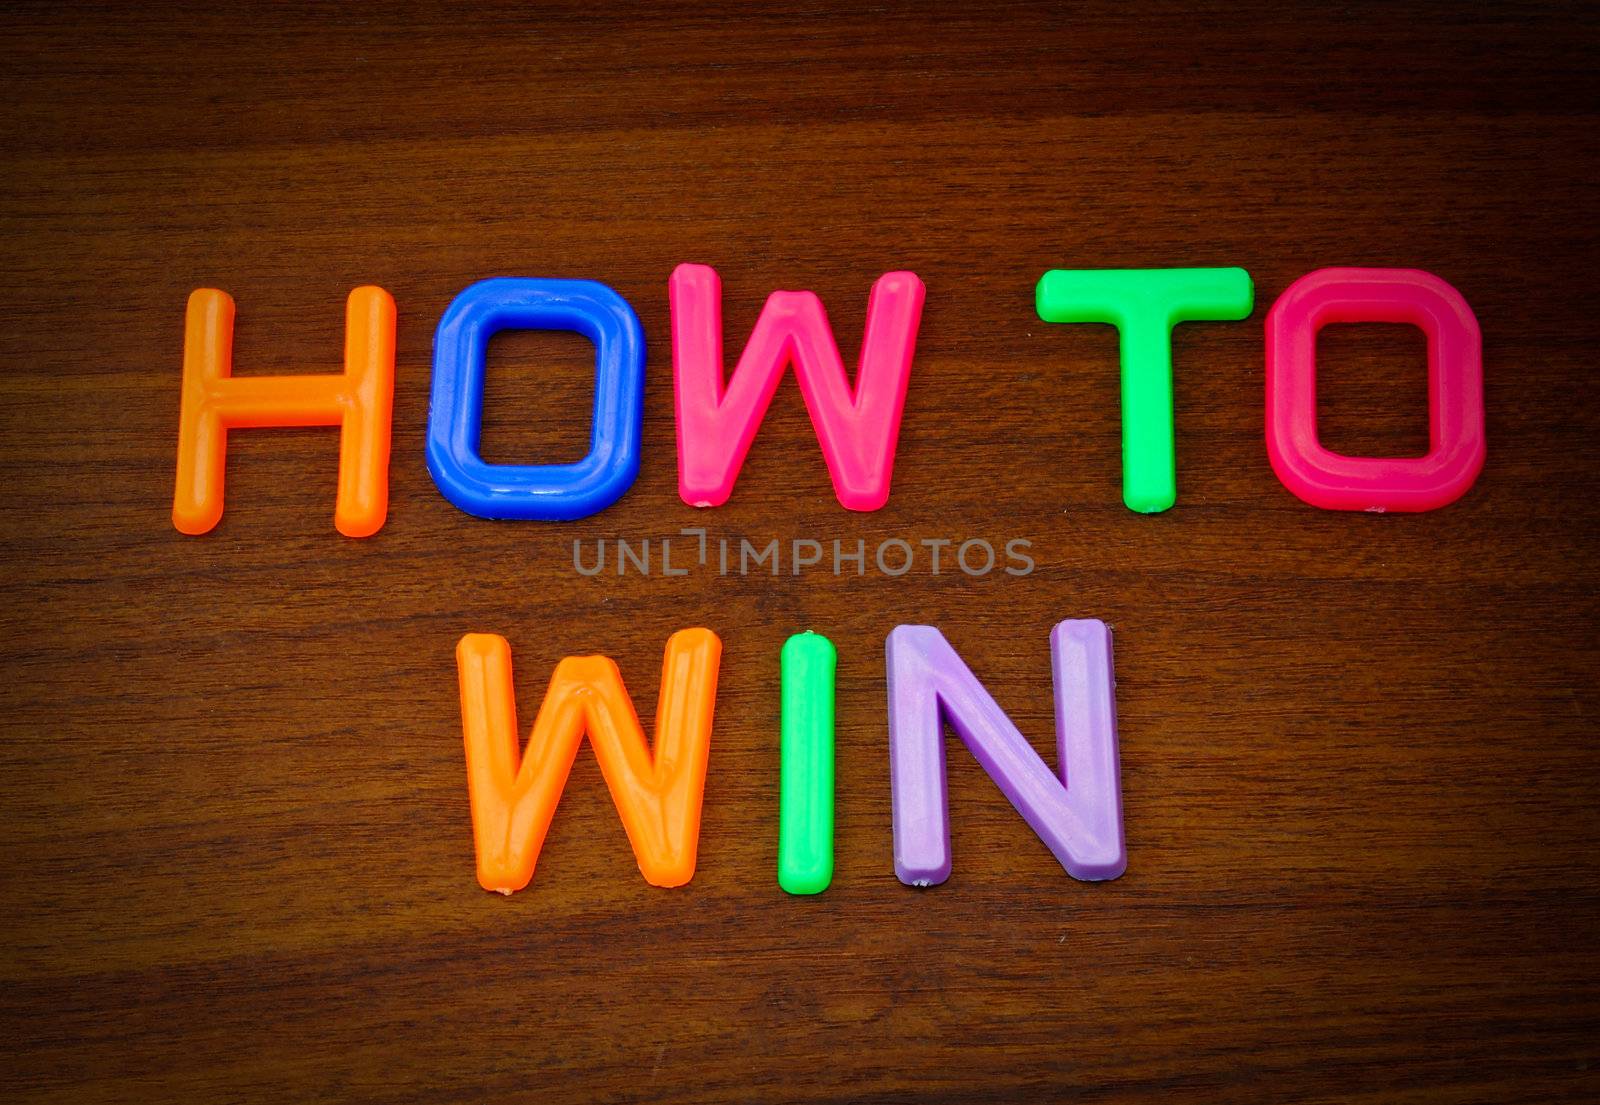 How to win in colorful toy letters on wood background